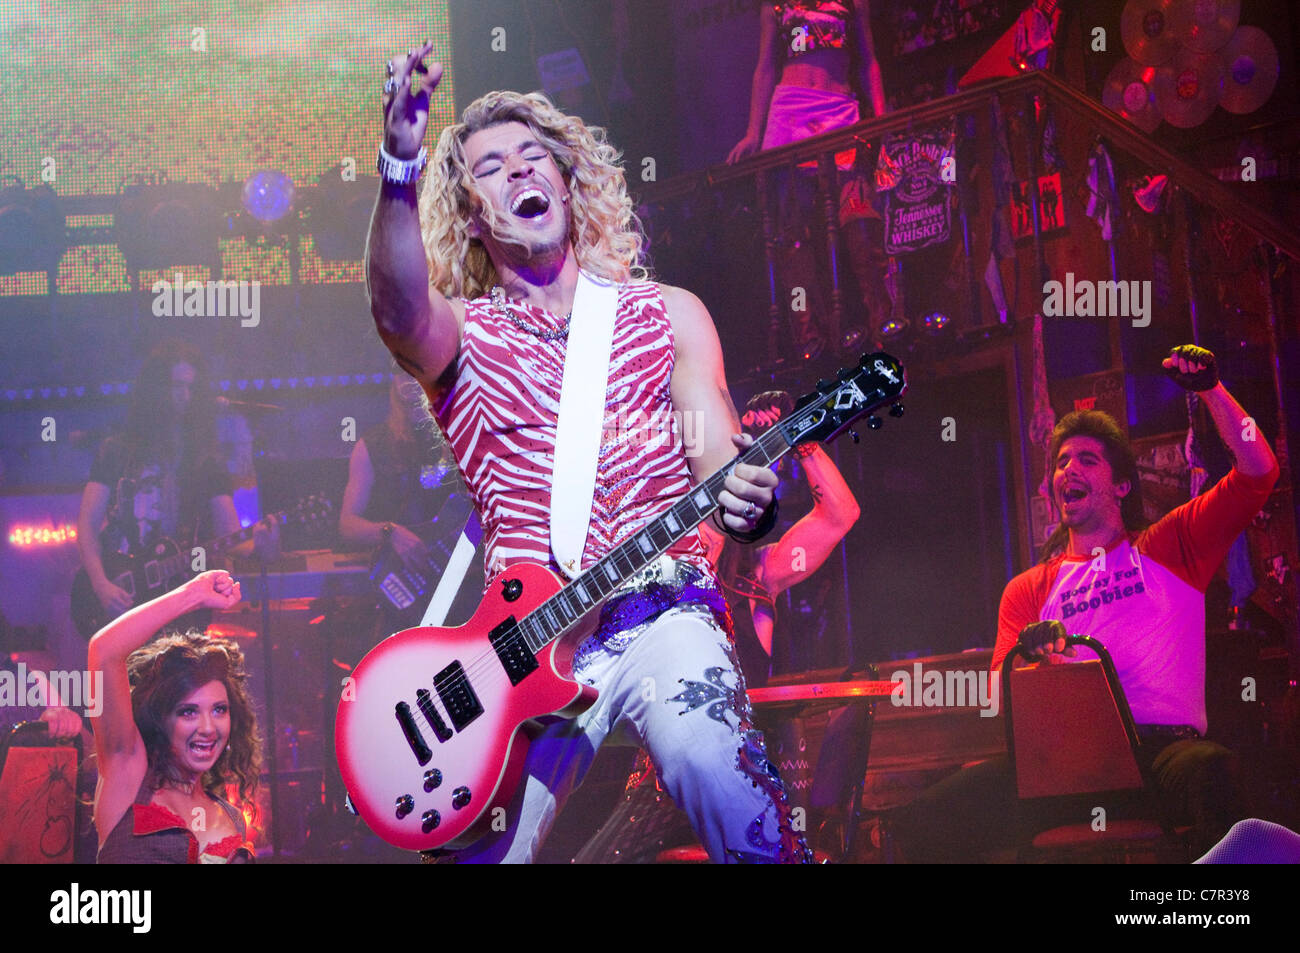 'Rock of Ages, il Musical' in esecuzione a Shaftesbury Theatre. Shayne Ward, centro. Foto Stock